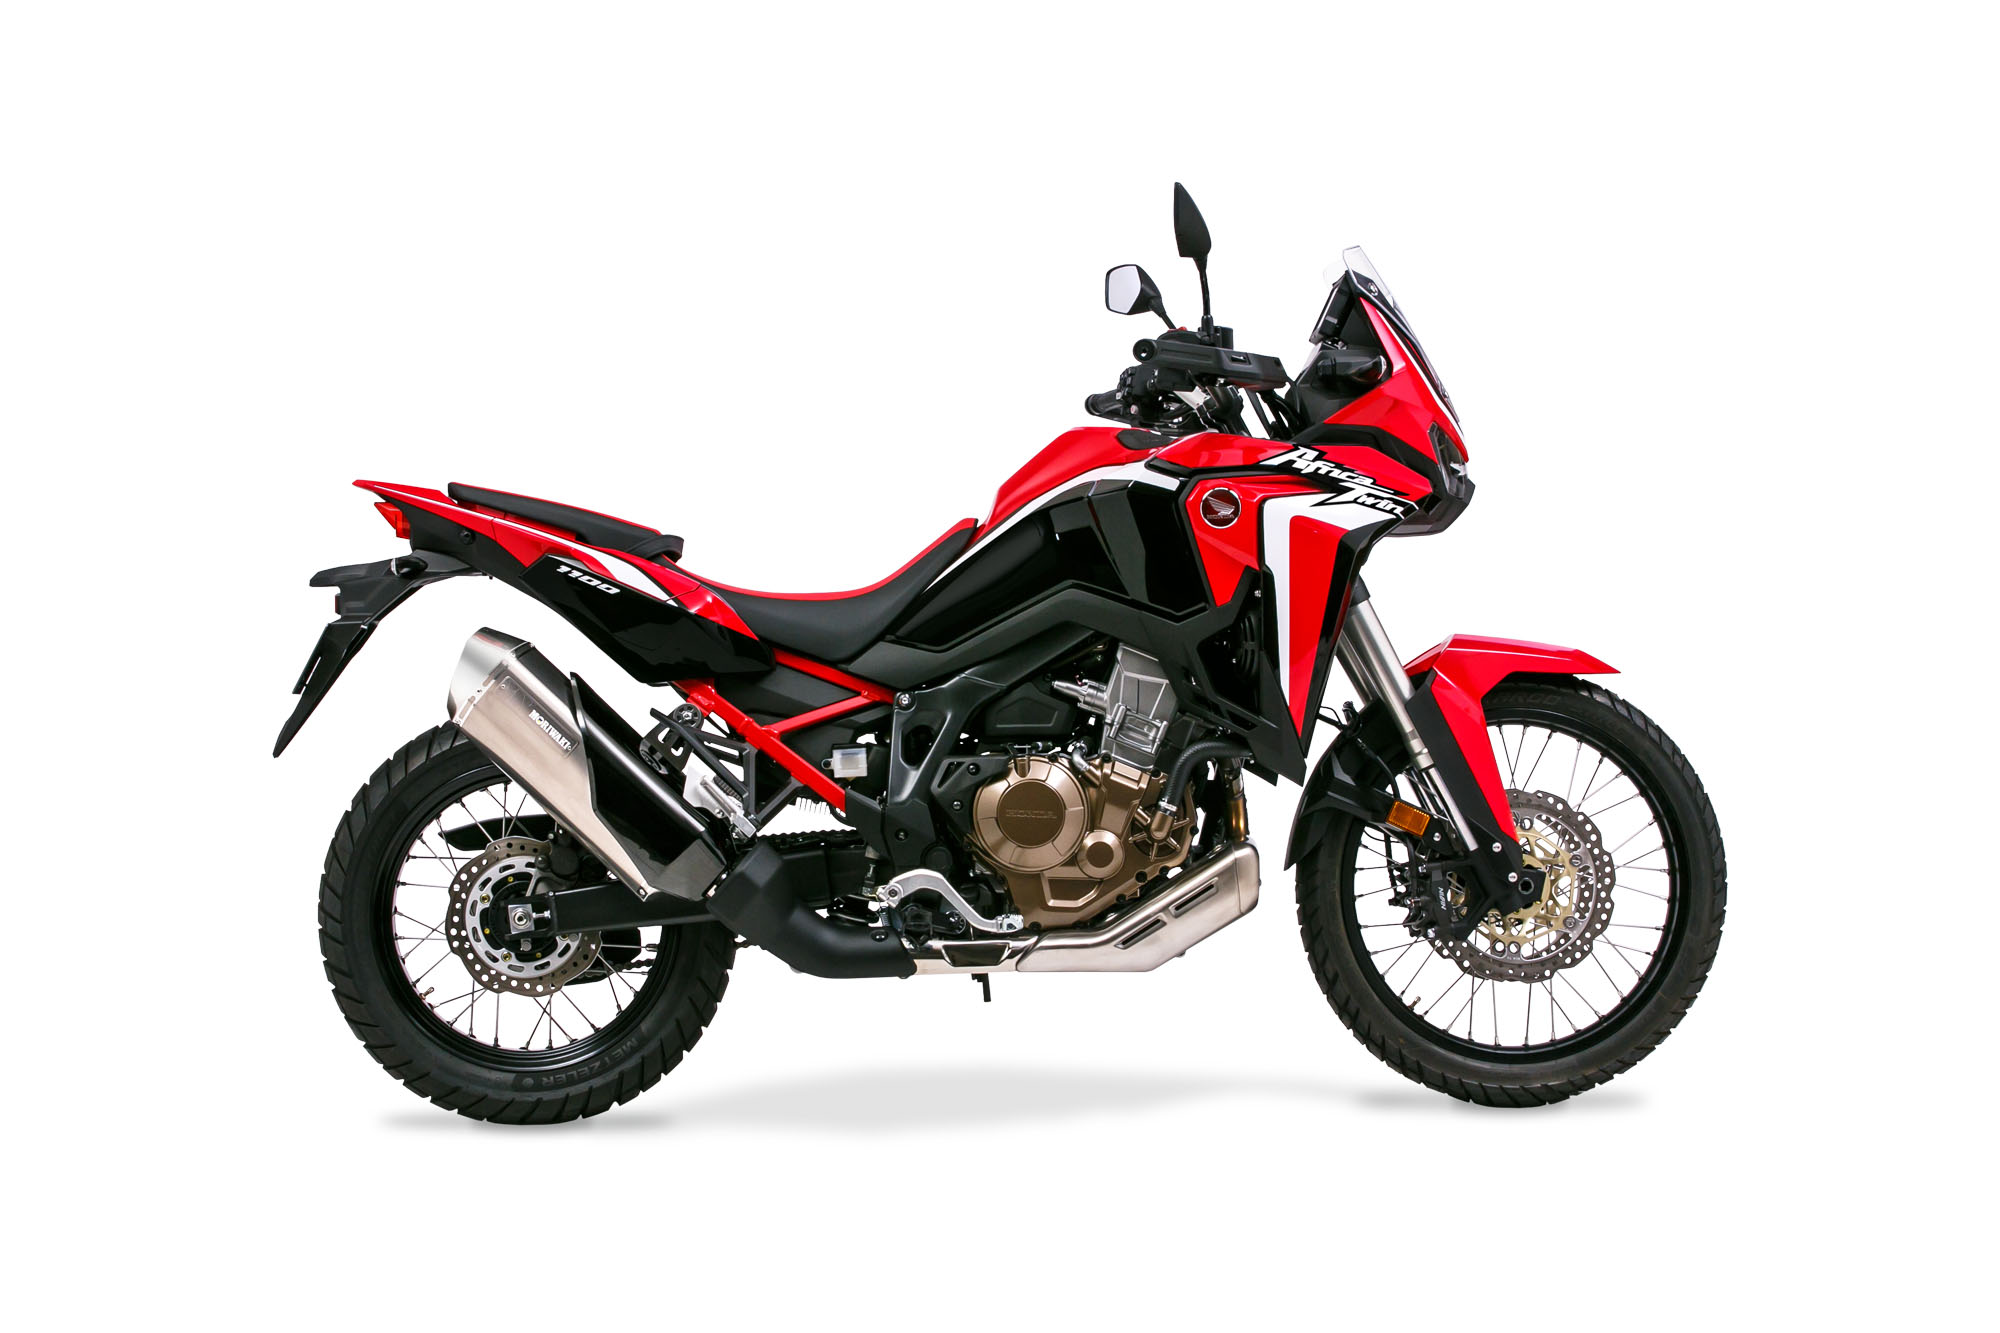 CRF1100L AfricaTwin 20-21
Slip-On Exhaust MX WT